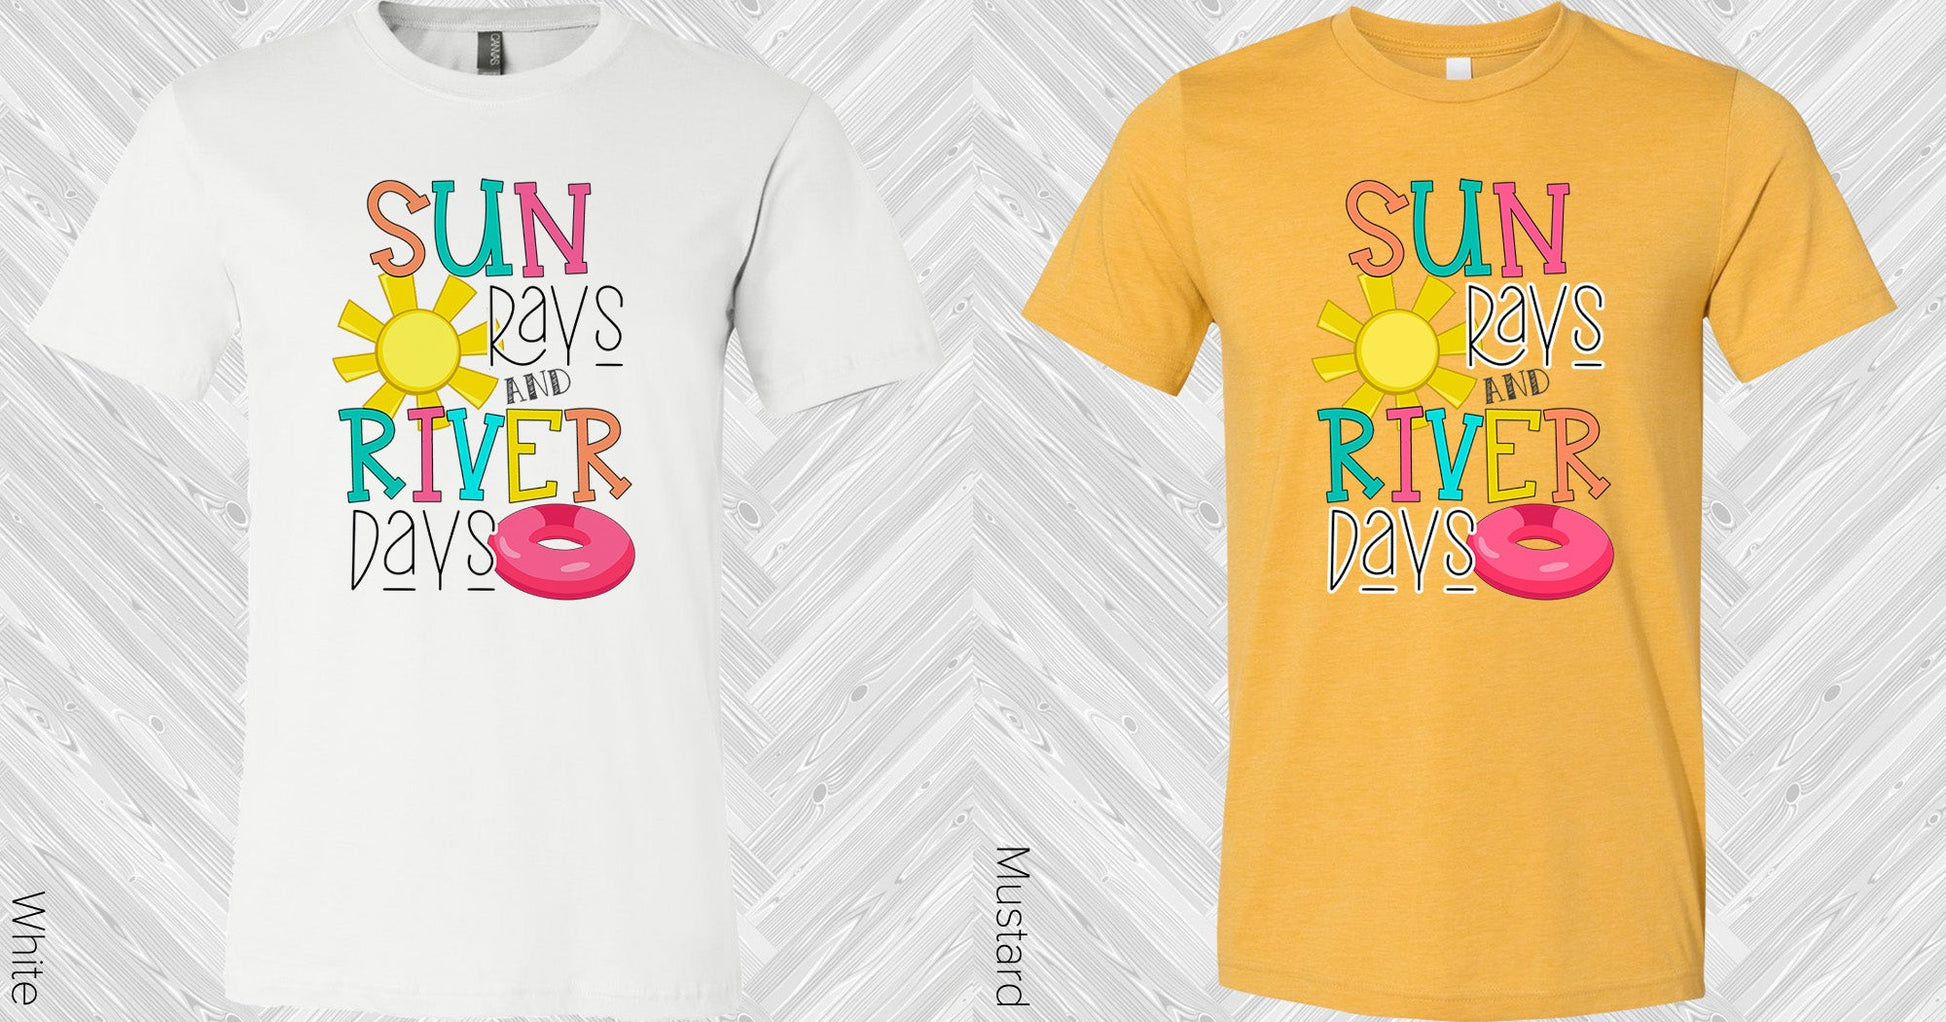 Suns Rays And River Days Graphic Tee Graphic Tee